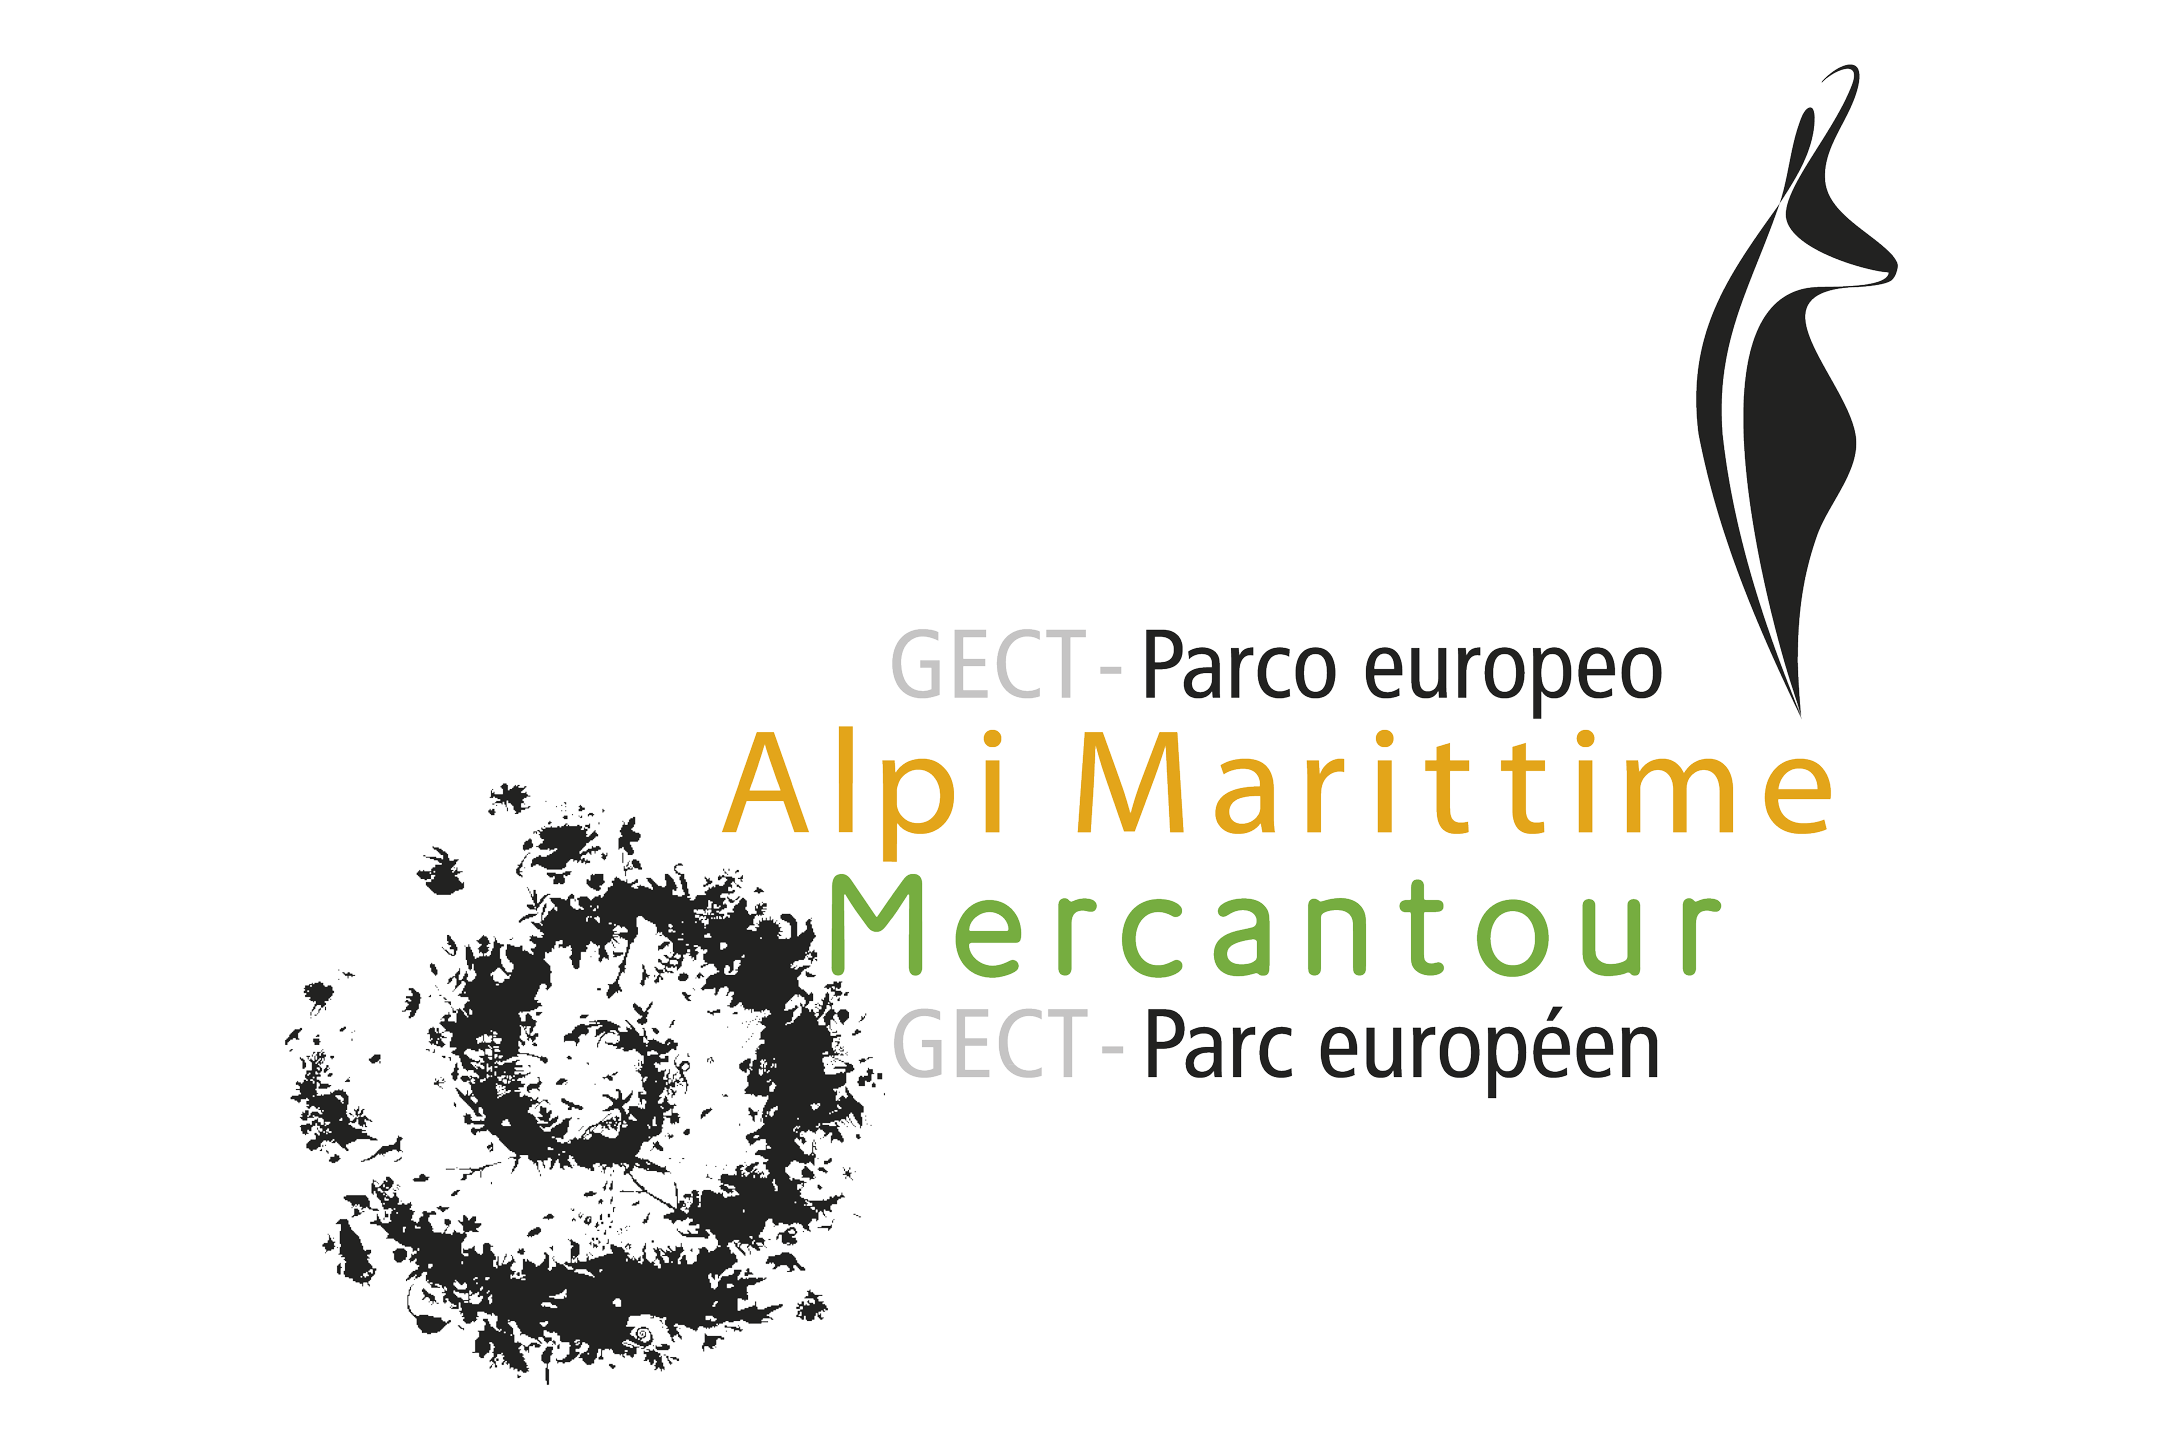 The Mercantour spiral and the Alpi Marittime chamoix adorn the name of the CEGT european Park